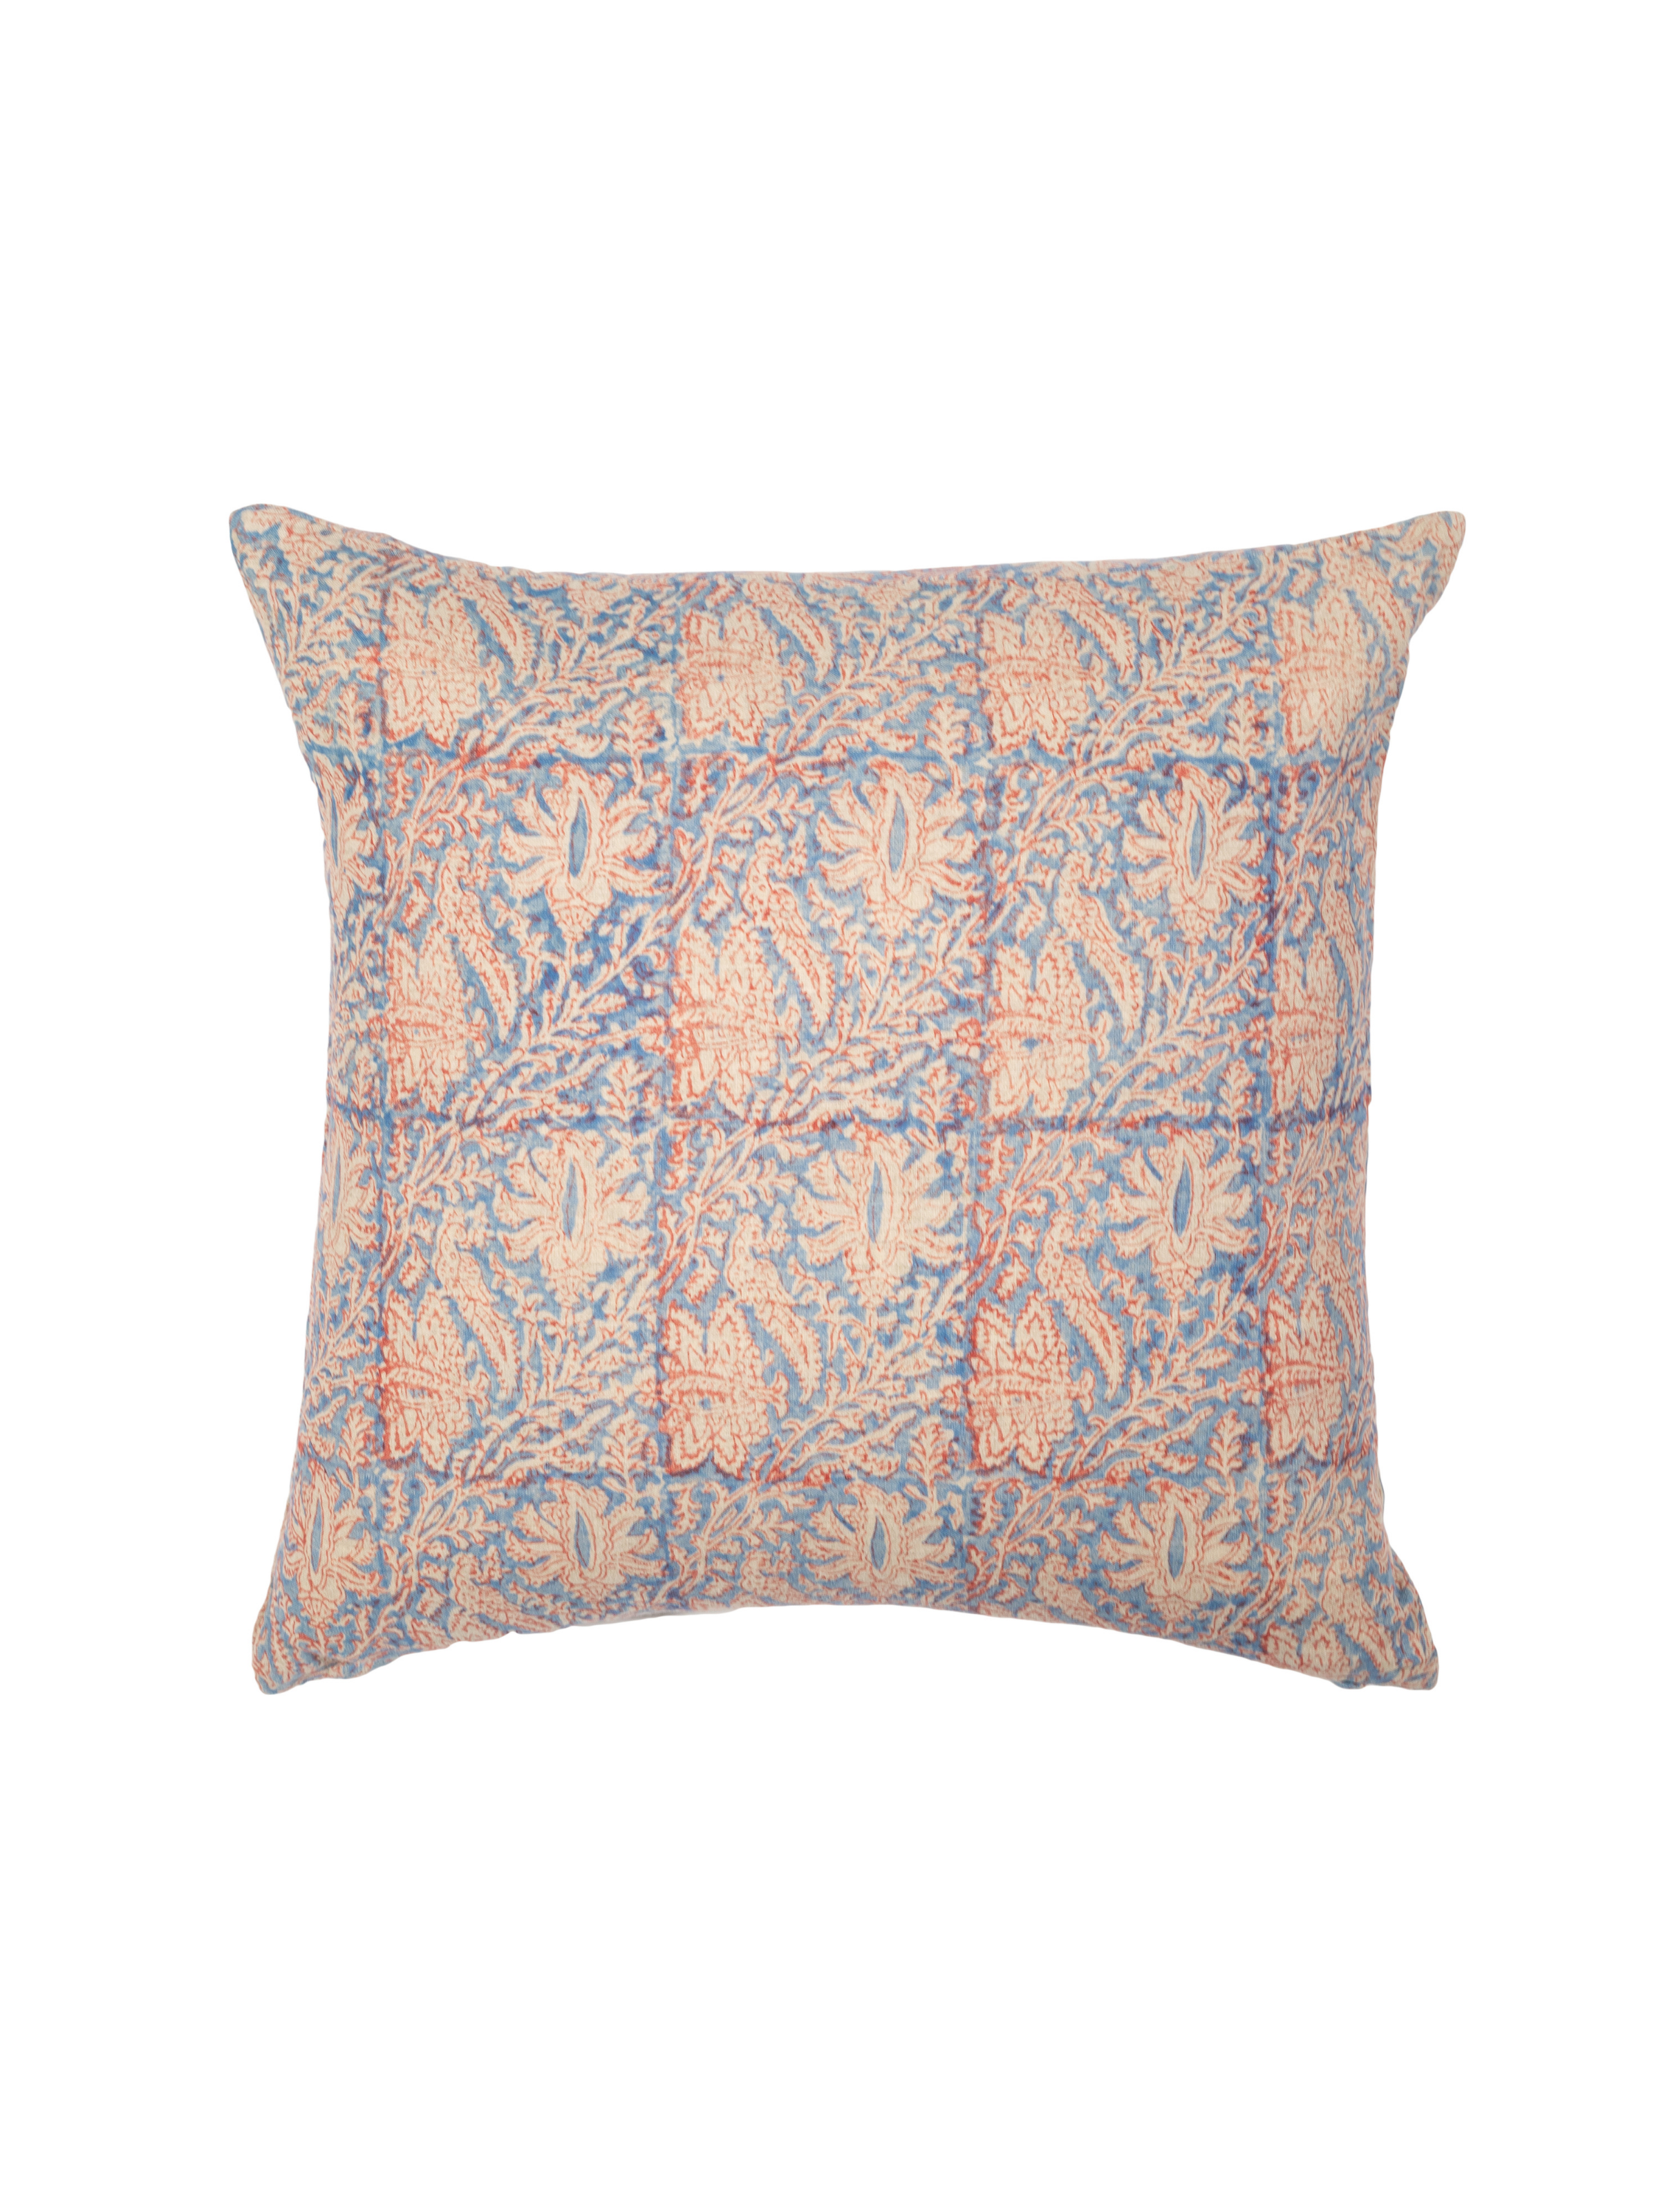 Orchid Vintage Red And Blue Decorative Pillow Cover